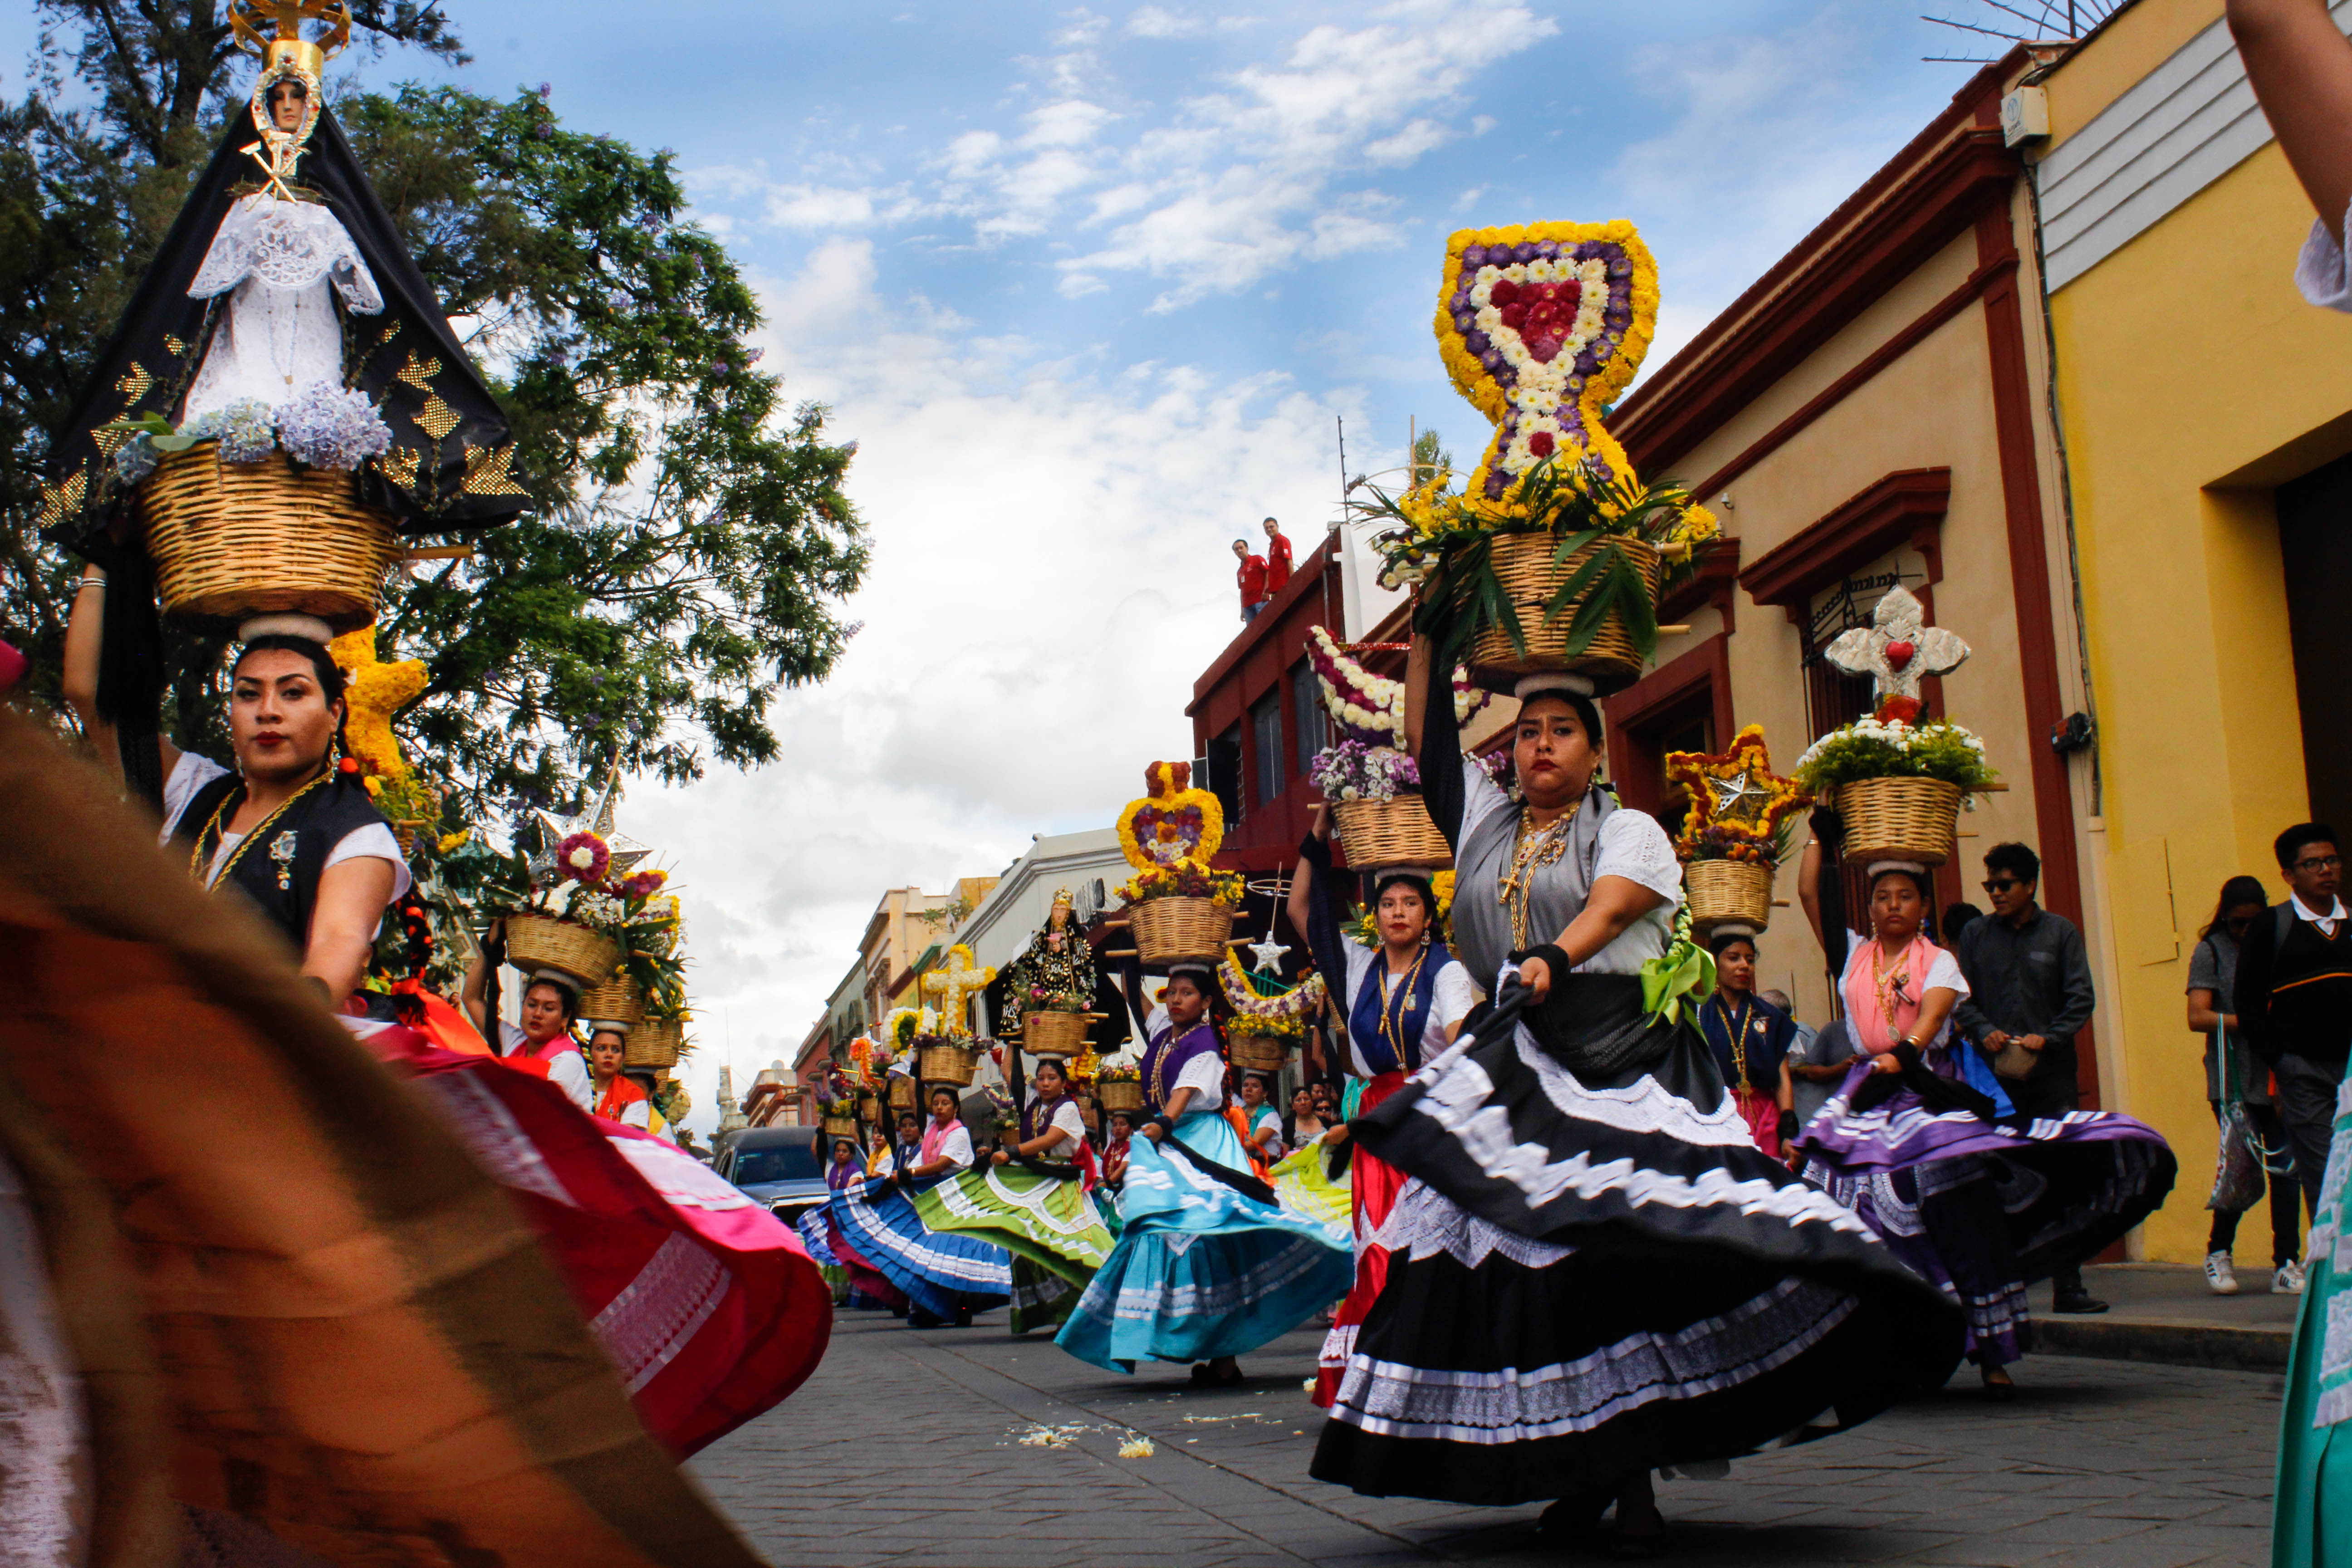 Funeral procession in Oaxaca. In some traditional places in Mexico, when someone dies, the whole neighborhood marches with the coffin to honor death.